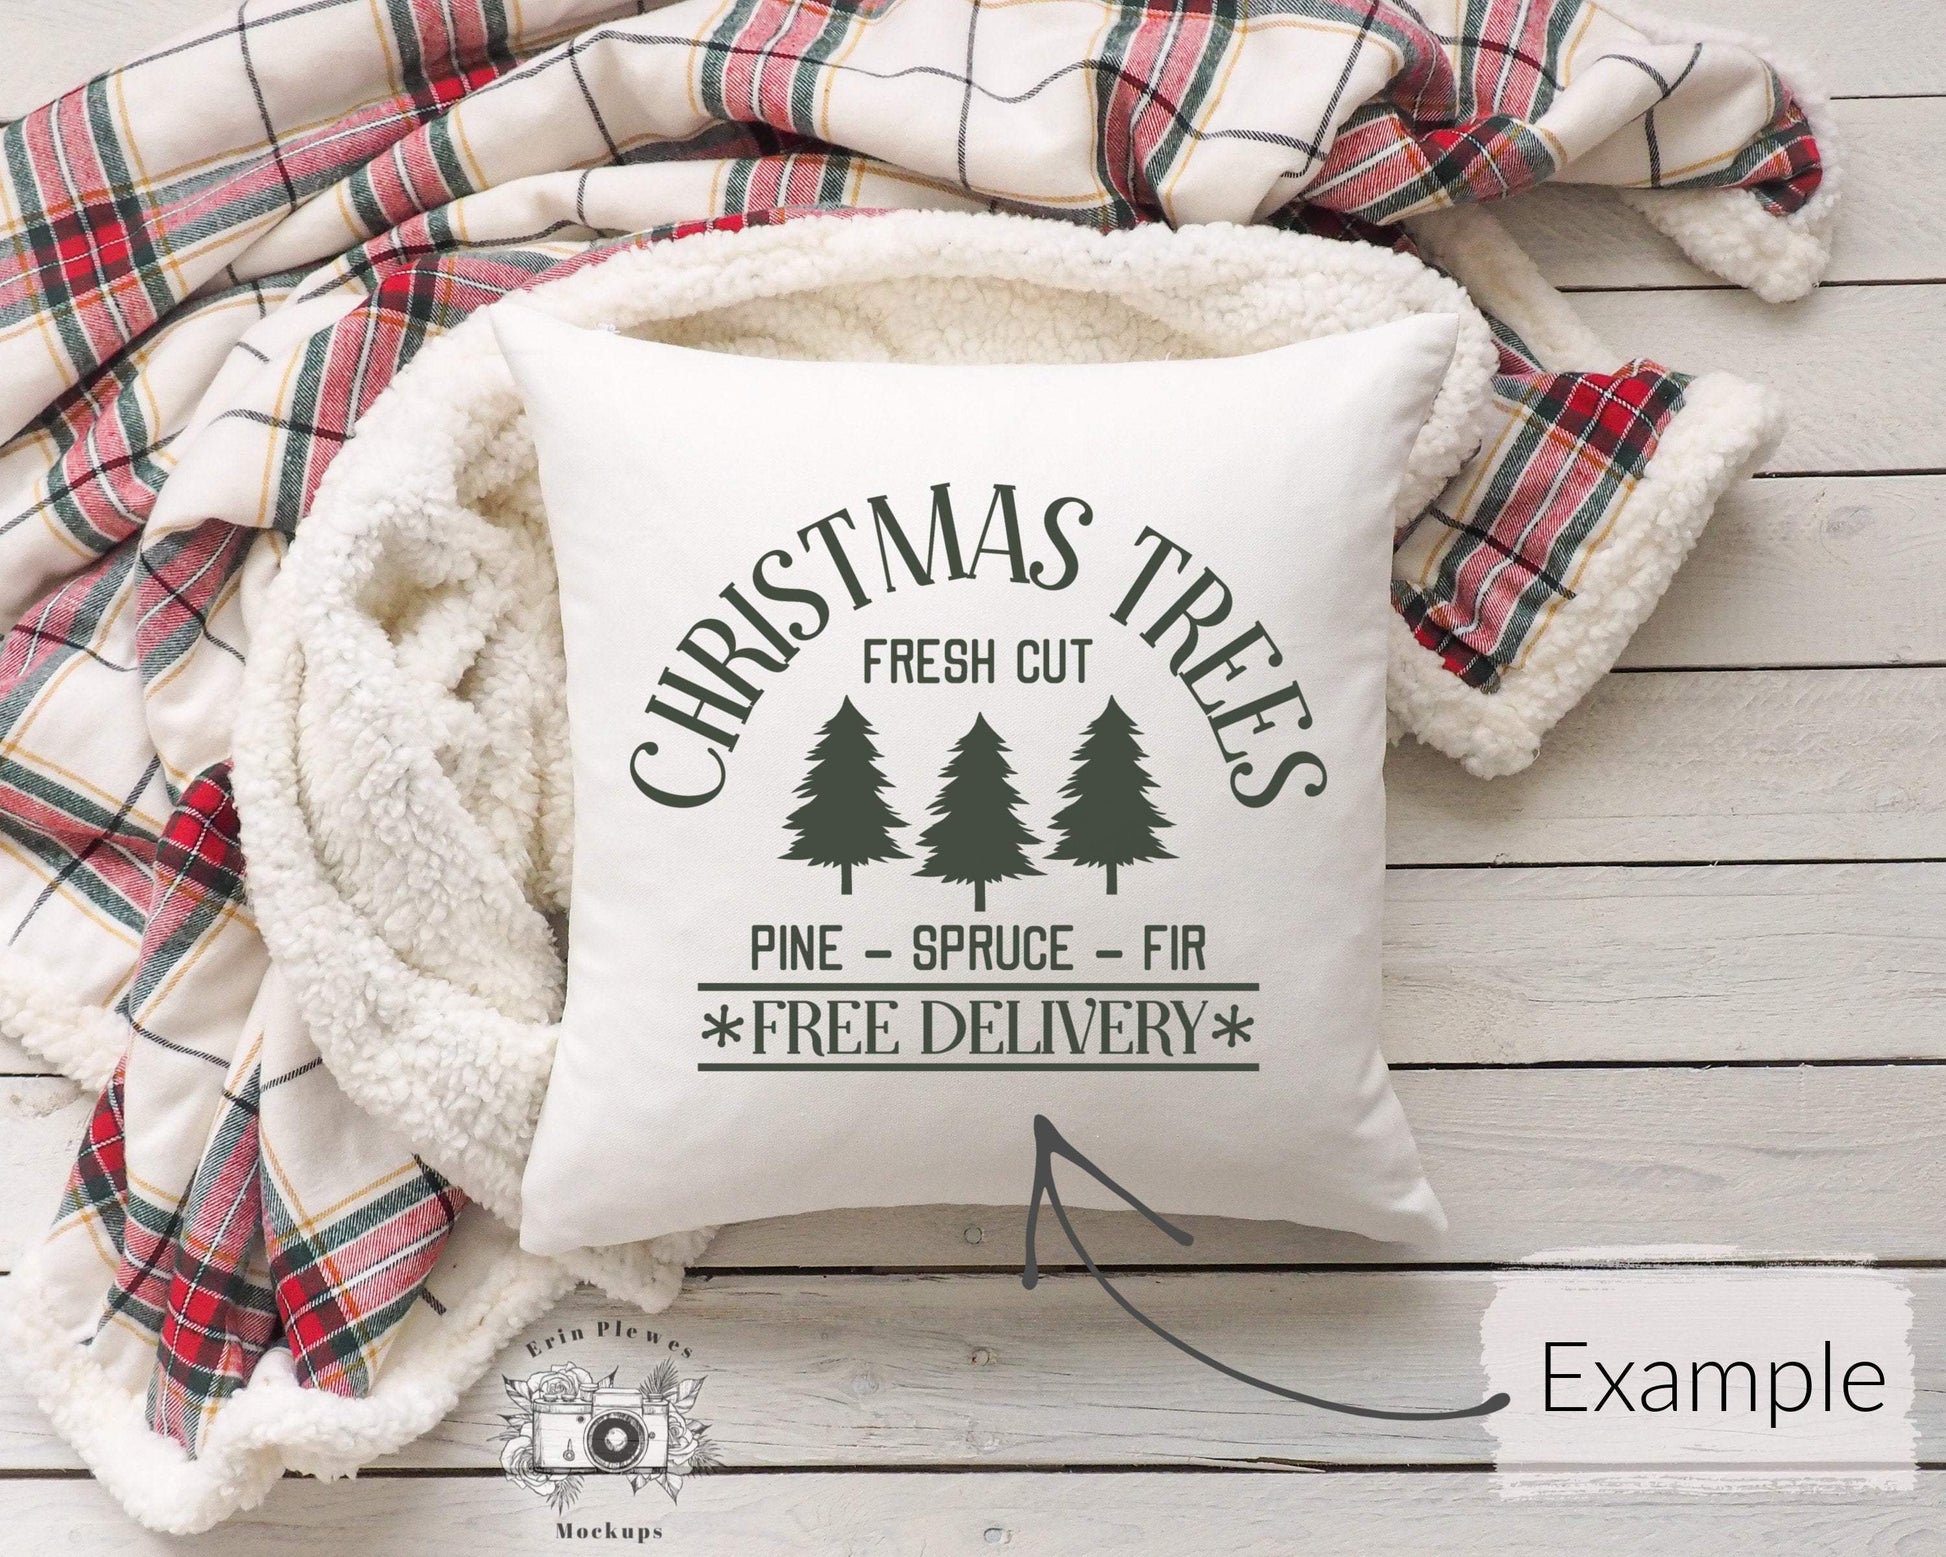 Erin Plewes Mockups Square Pillow Mockup, Pillow mockup with red plaid blanket for Christmas styled stock photo, Throw pillow mock up digital download